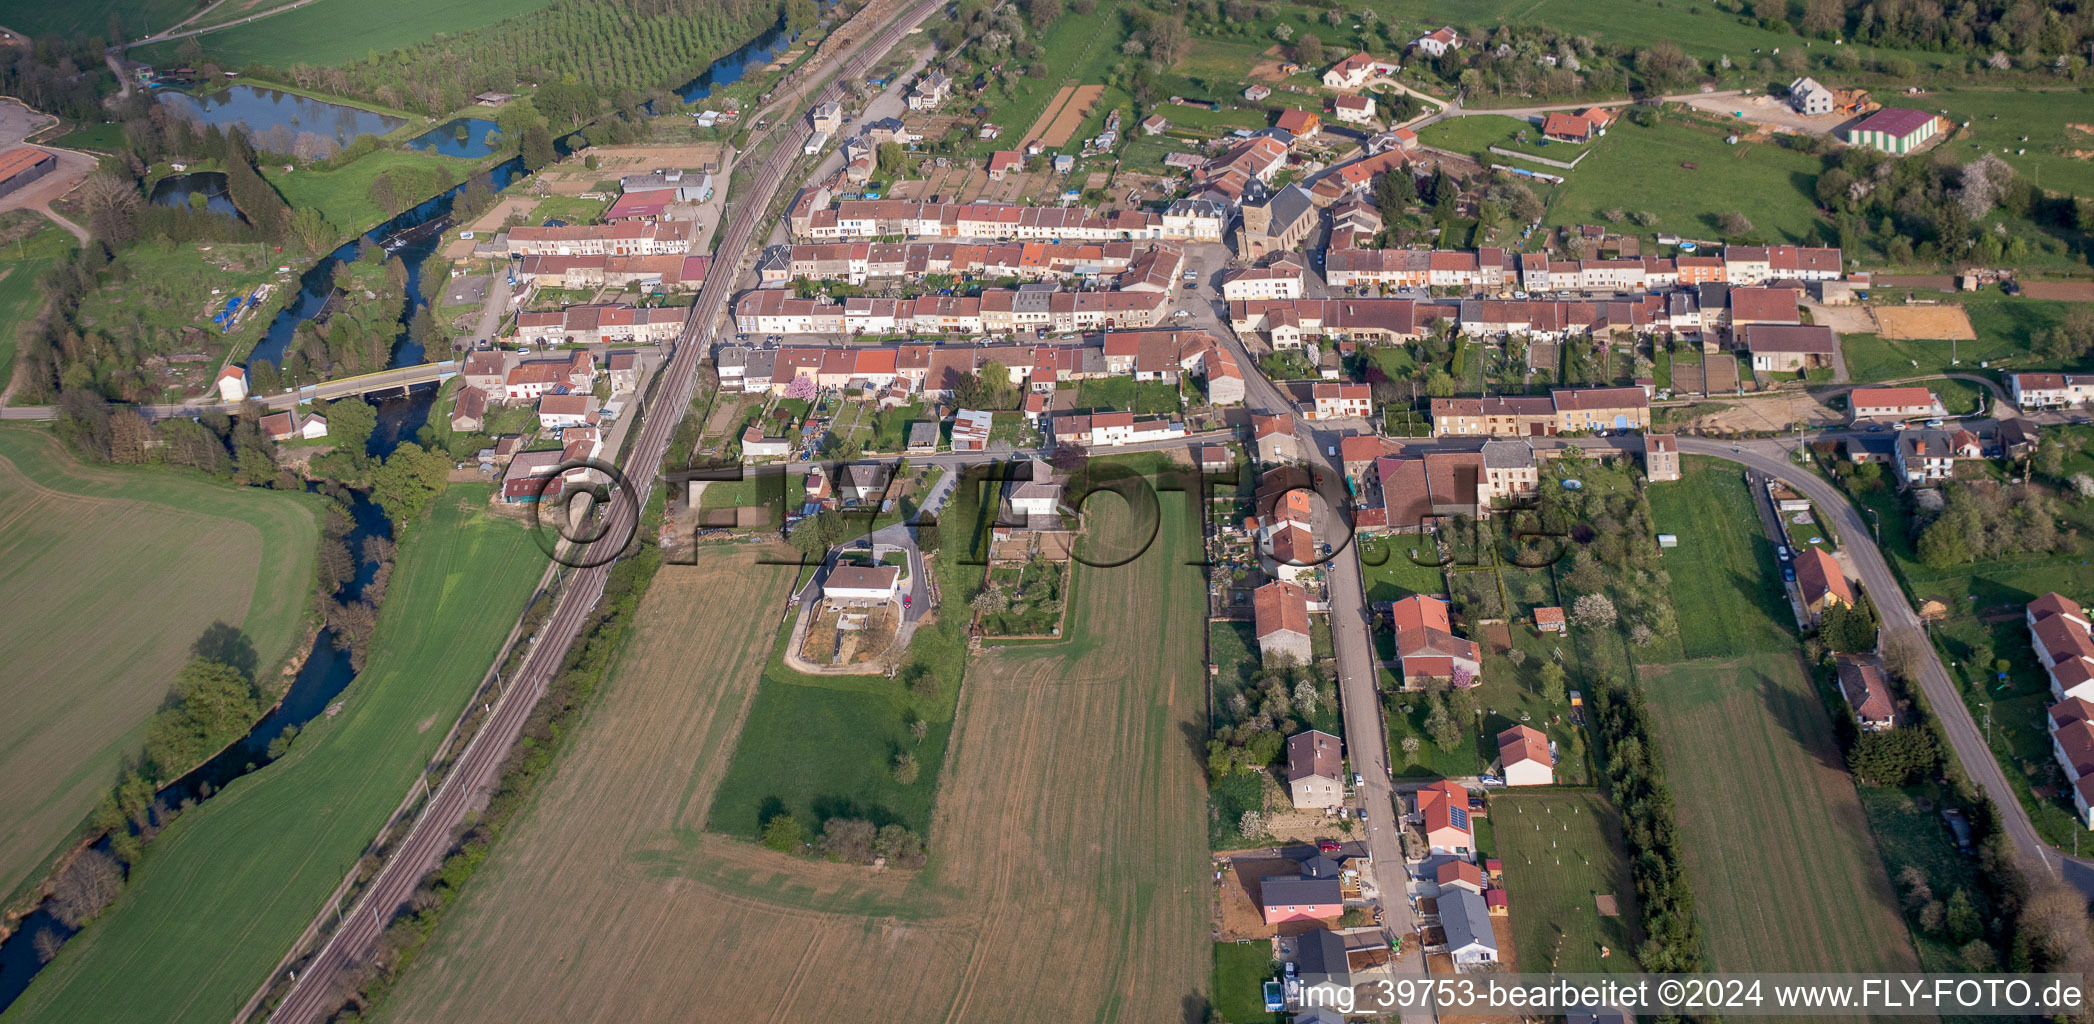 Aerial view of Village - view on the edge of agricultural fields and farmland in Charency-Vezin in Grand Est, France